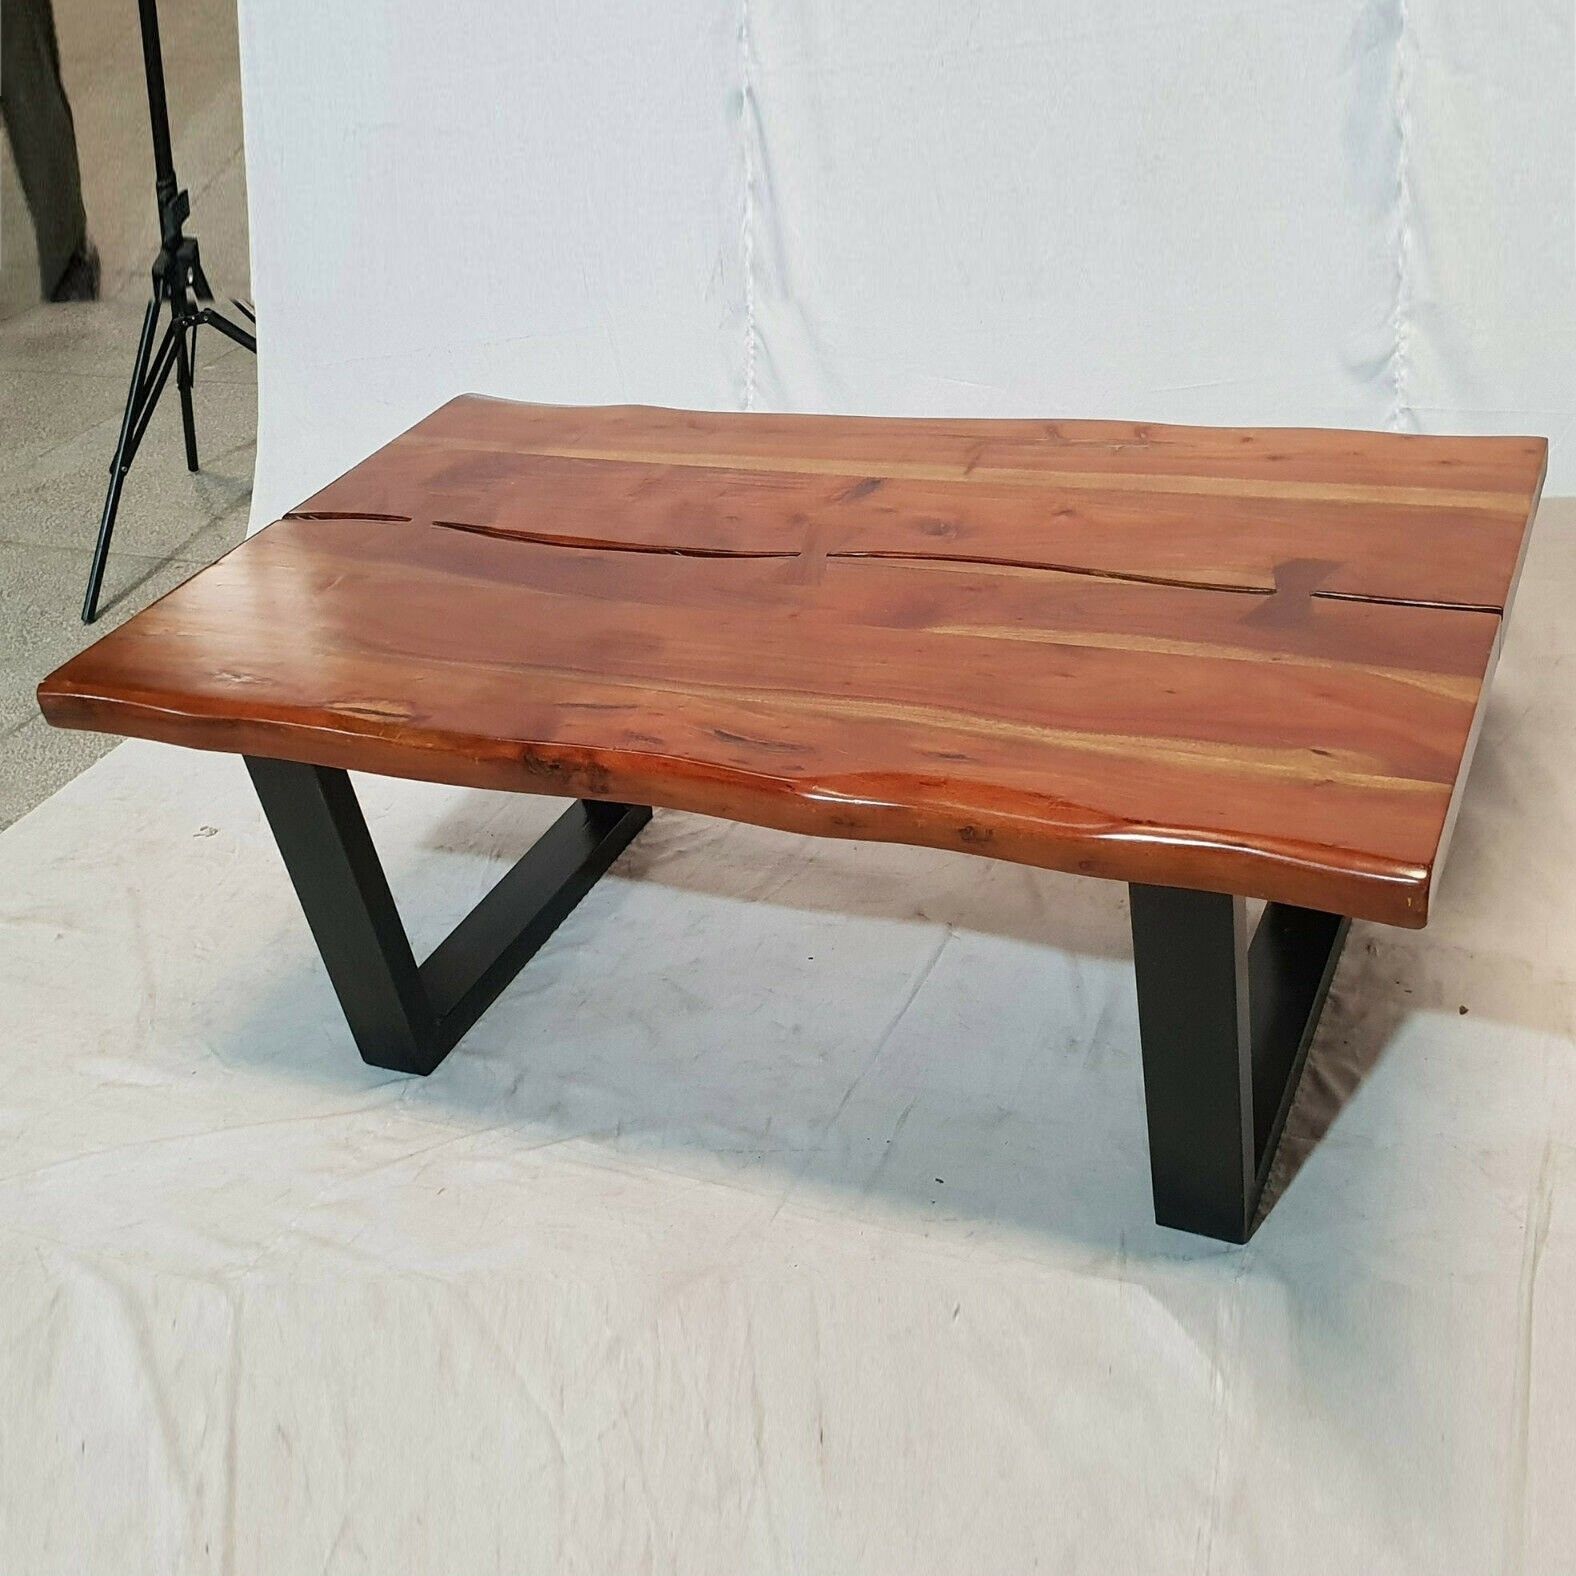 Solid Acacia Wood Live Edge Coffee Table Industrial Metal Legs 122 X 76cm In Solid Acacia Wood Coffee Tables (View 17 of 20)